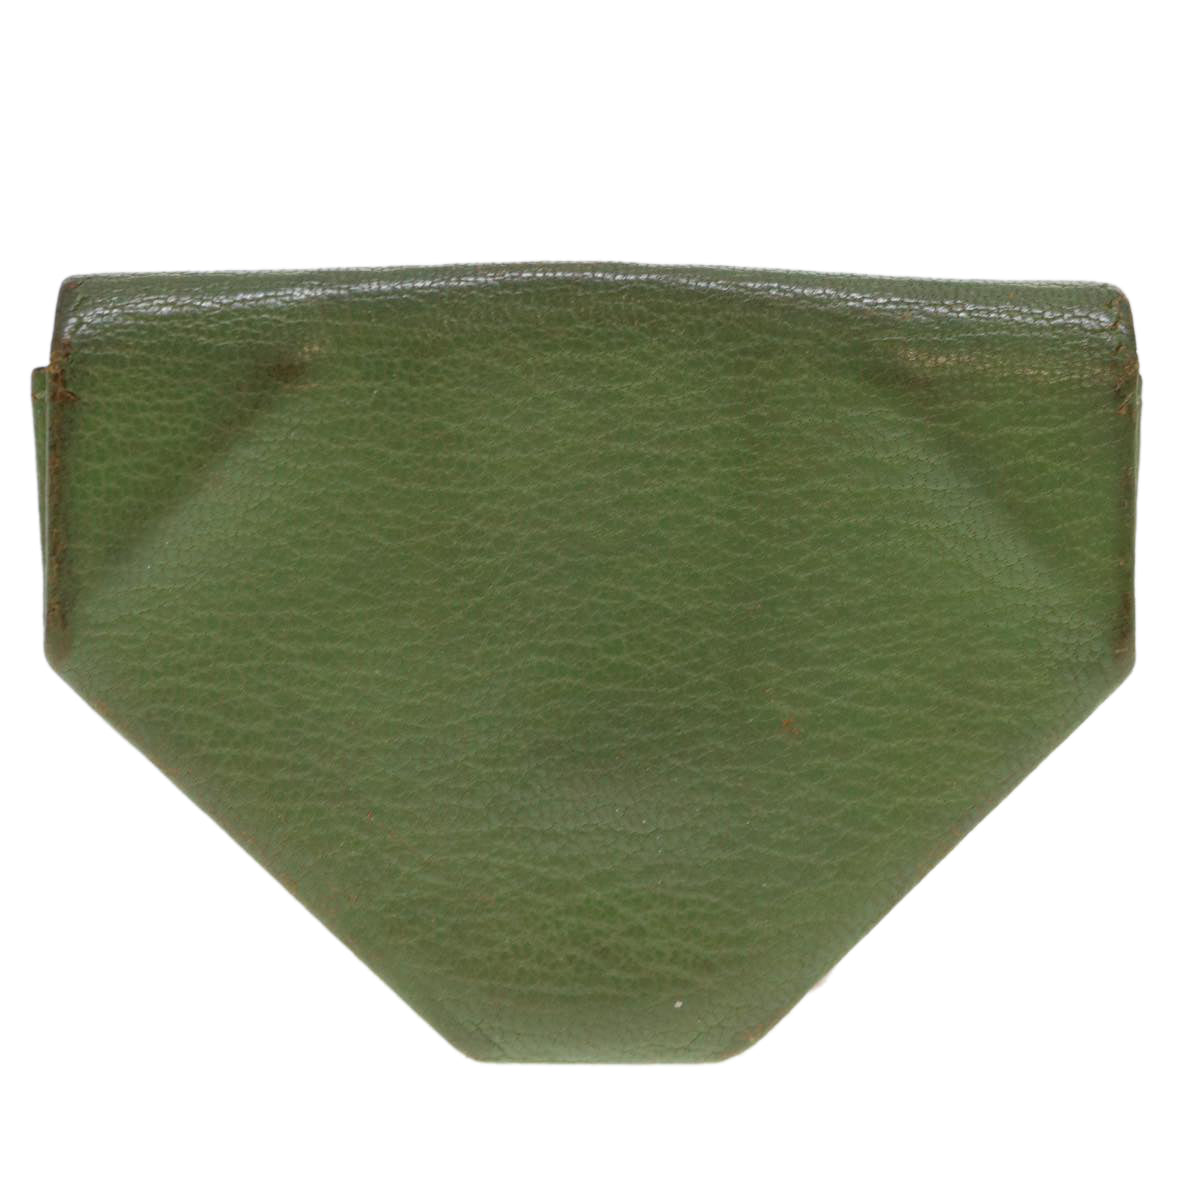 HERMES Le Van Cator Coin Purse Leather Green Auth bs4656 - 0